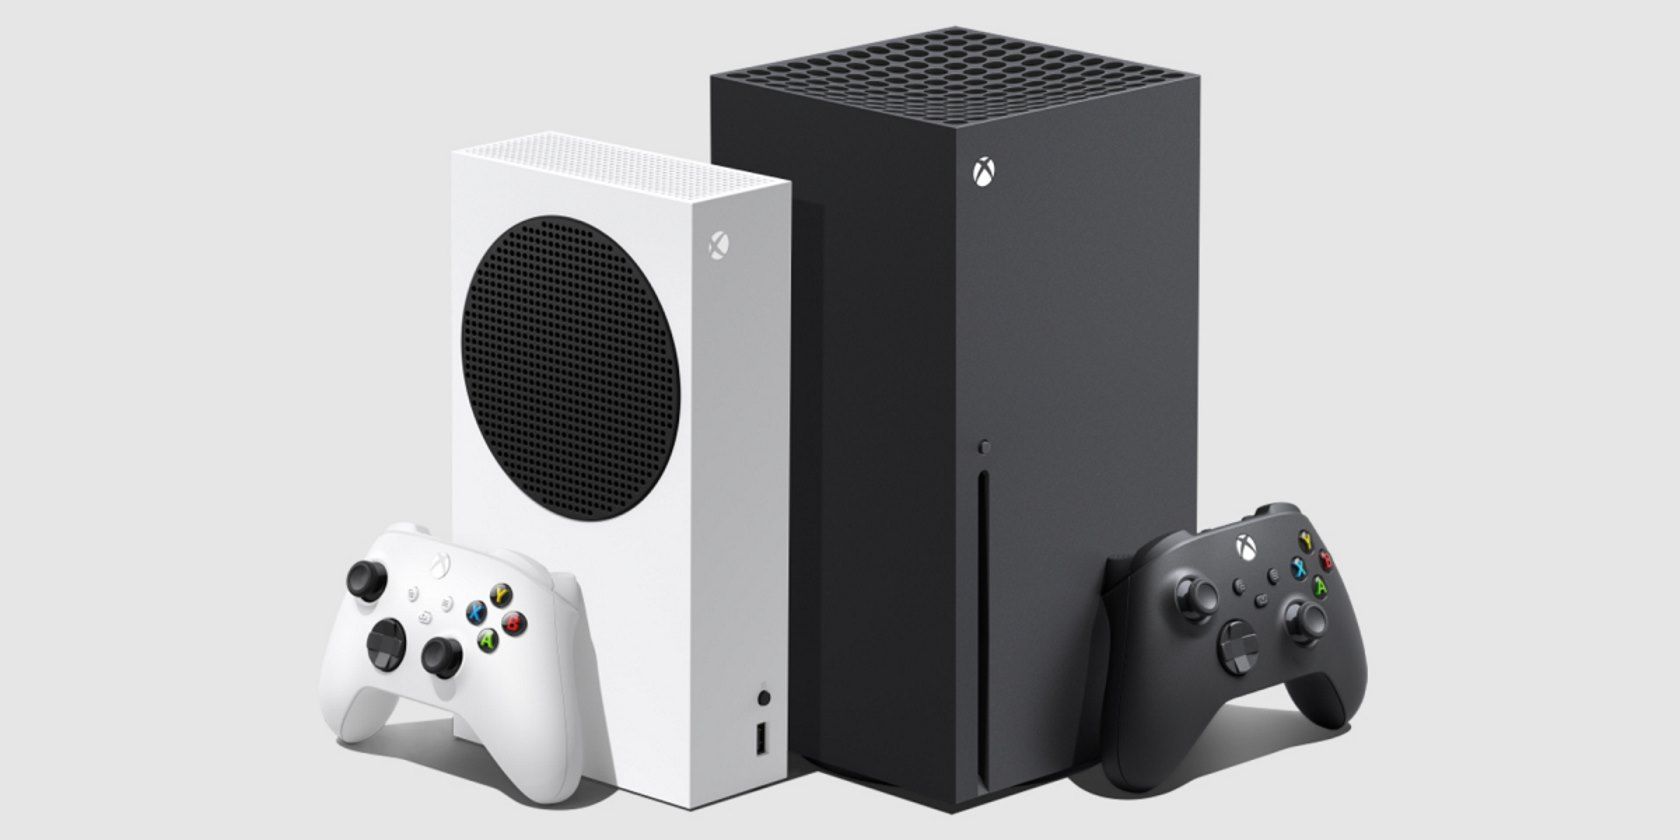 Xbox Series X and Xbox Series S Which One Should You Buy?